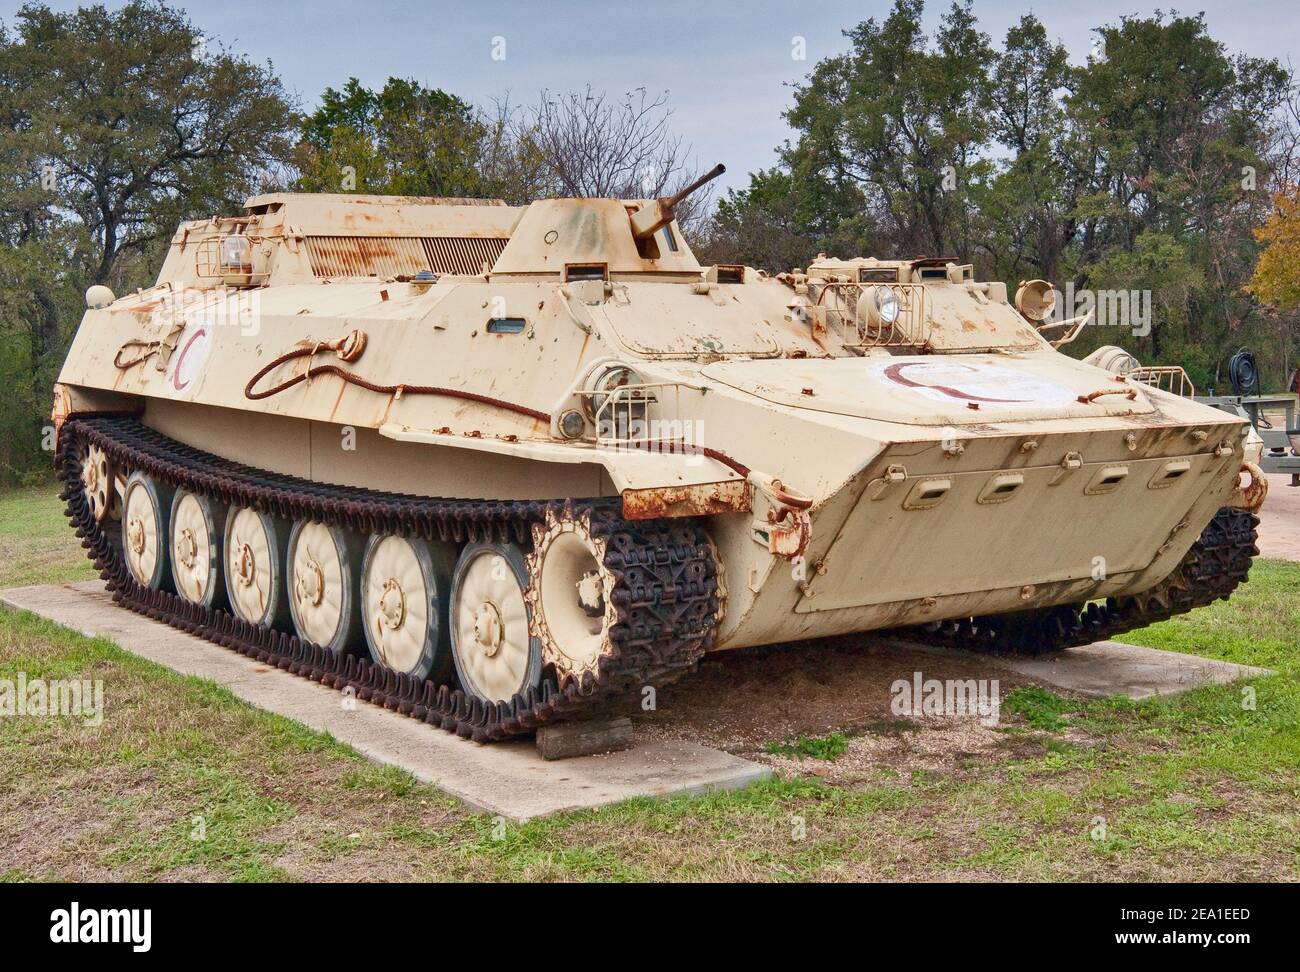 LT-LB Soviet Multi-purpose Tracked Vehicle captured in Operation Desert Storm, Armor Row at Texas Military Forces Museum at Camp Mabry in Austin Texas Stock Photo